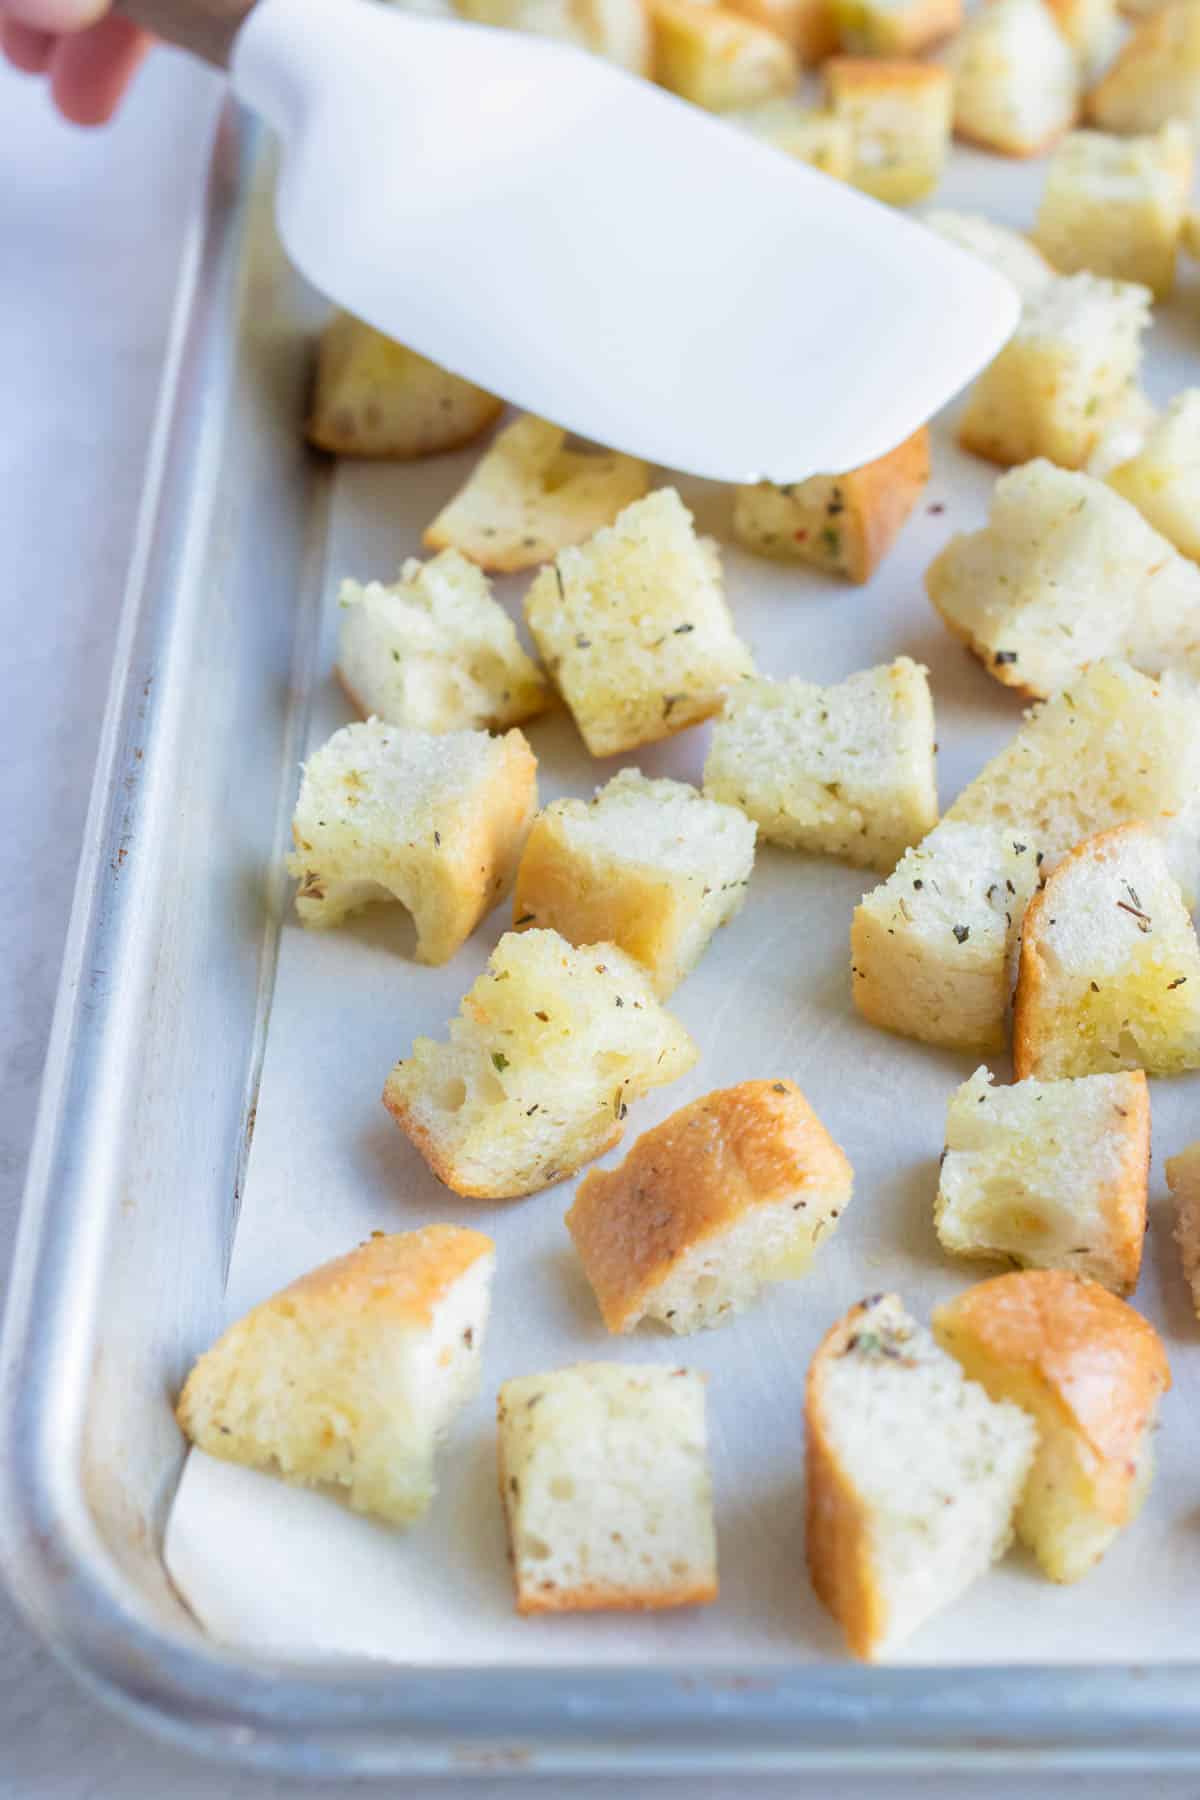 Bread cubes are spread out on a baking sheet before baking.